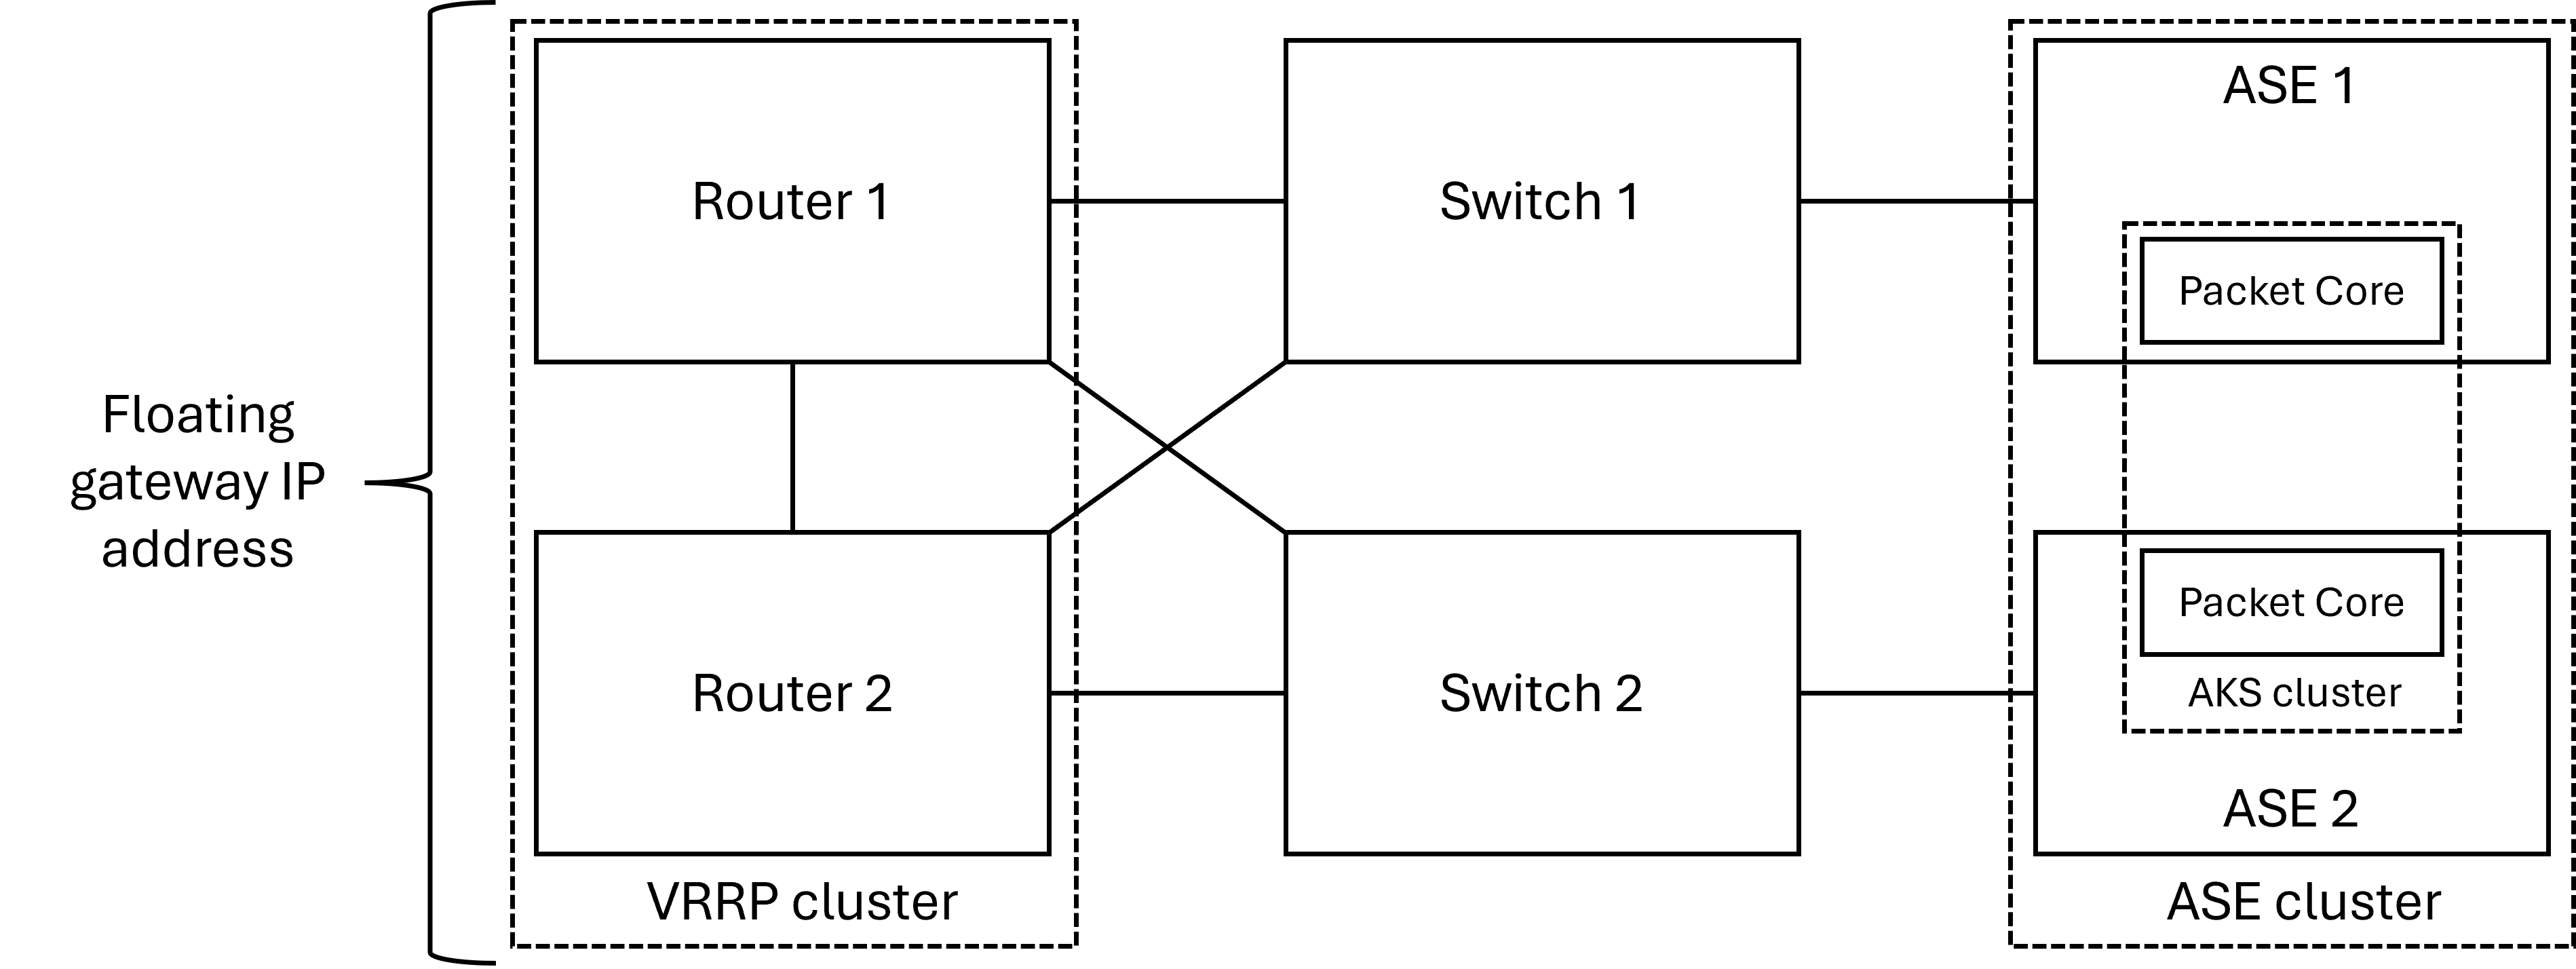 Diagram showing the physical layout of the access network with a redundant pair of routers.